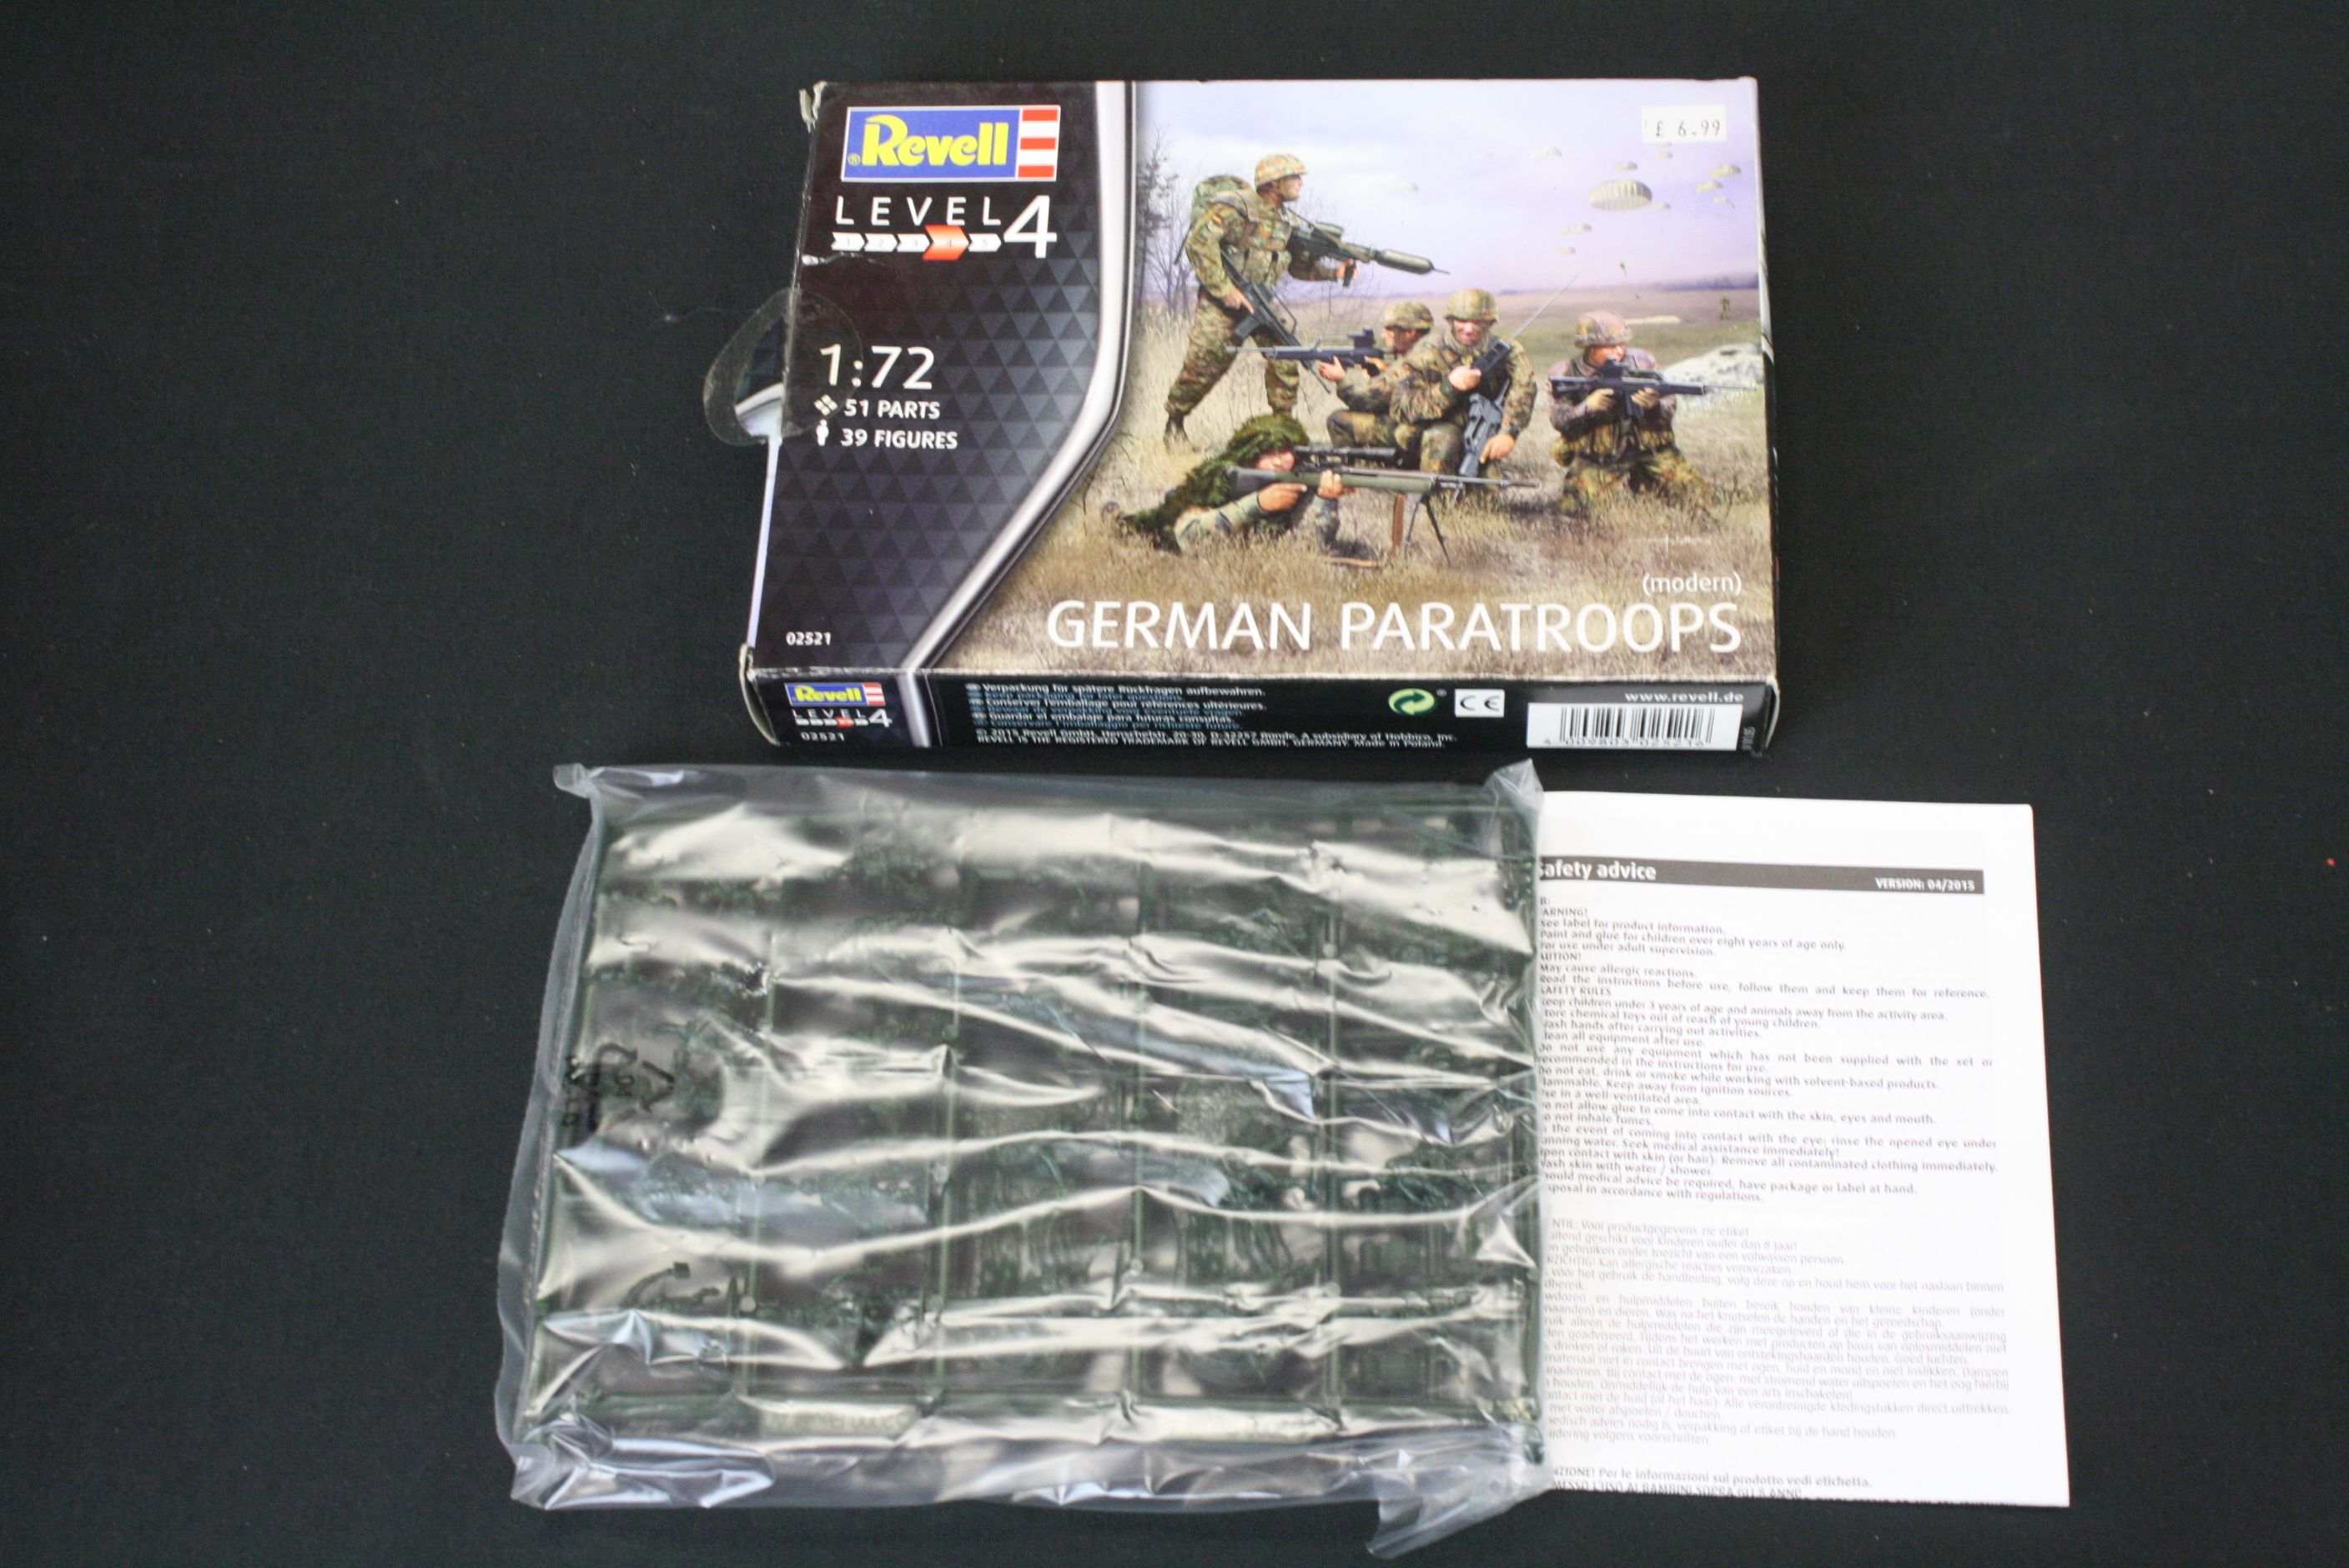 Eight boxed plastic model figure kits to include 5 x Revell 1/72 sets (02521 German Paratroopers, - Image 12 of 16